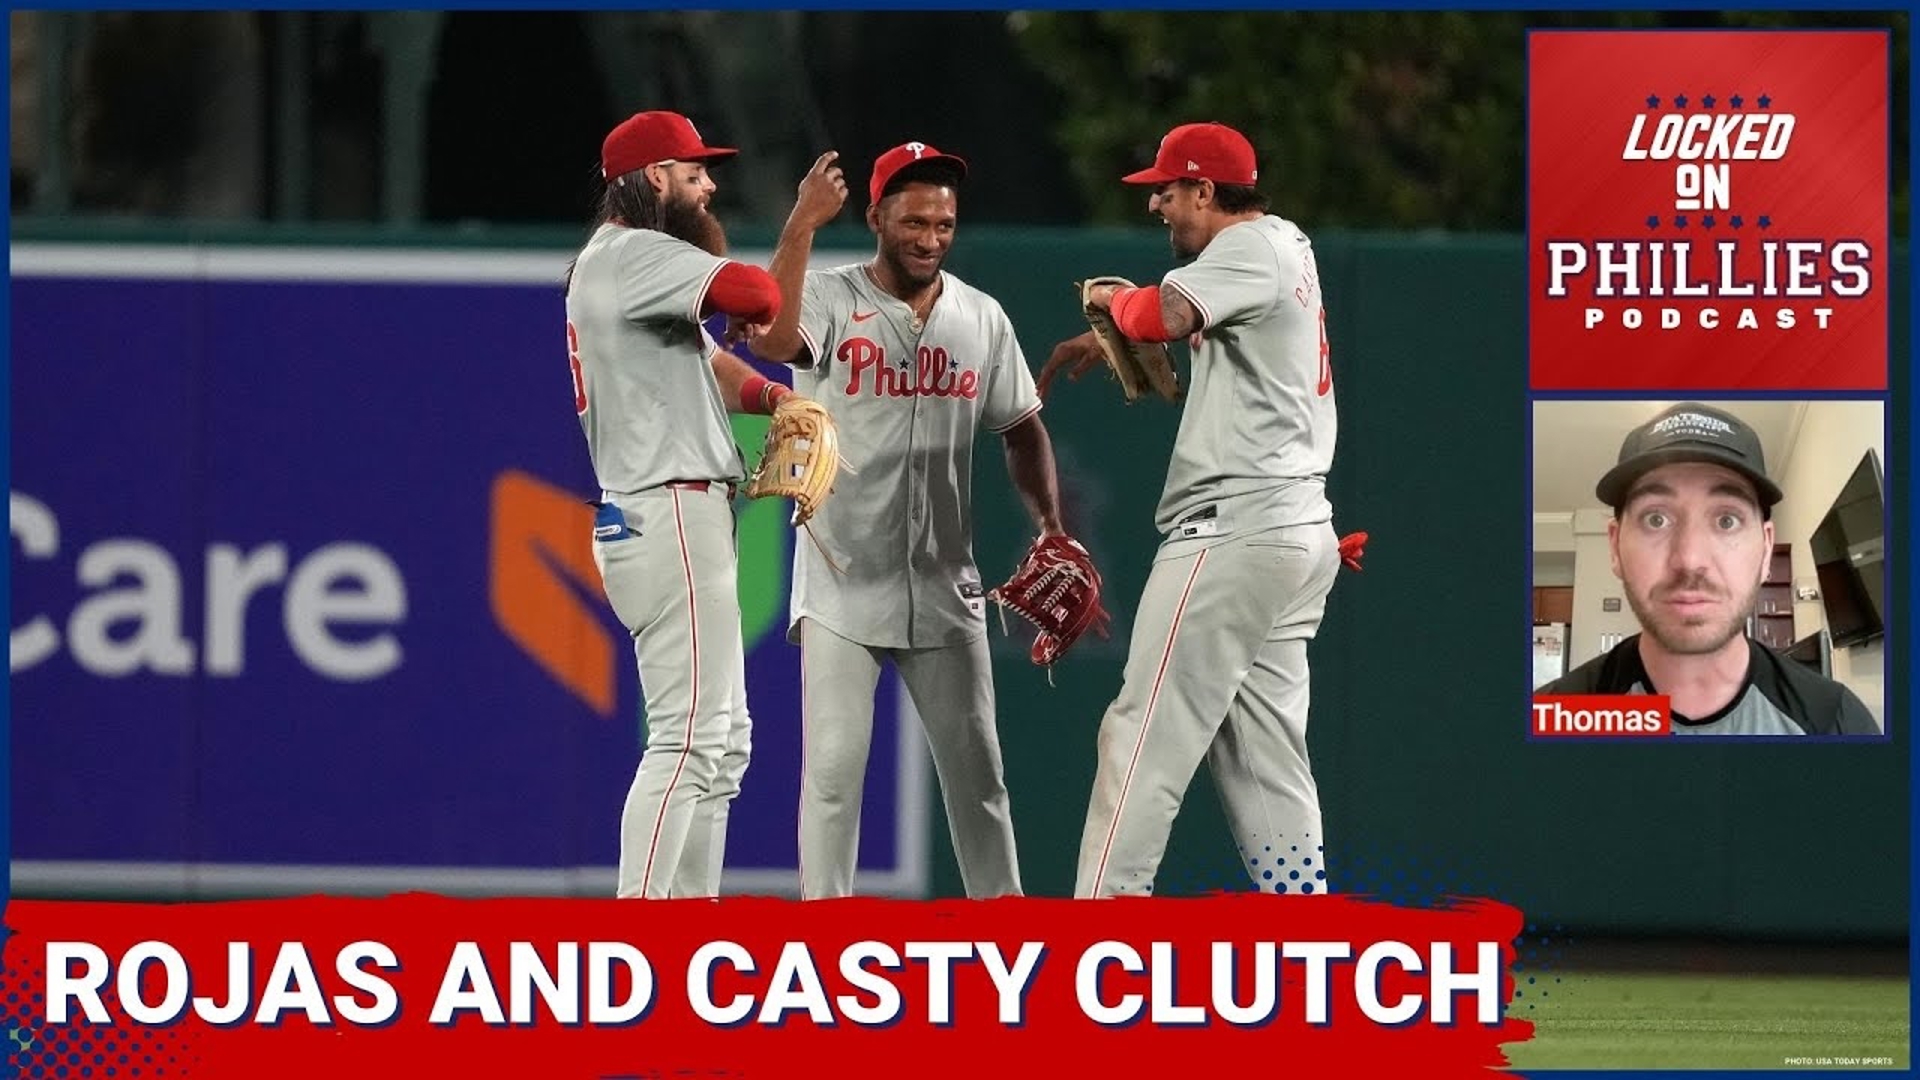 In today's episode, Connor breaks down the Philadelphia Phillies awesome comeback win over the Los Angeles Angels.